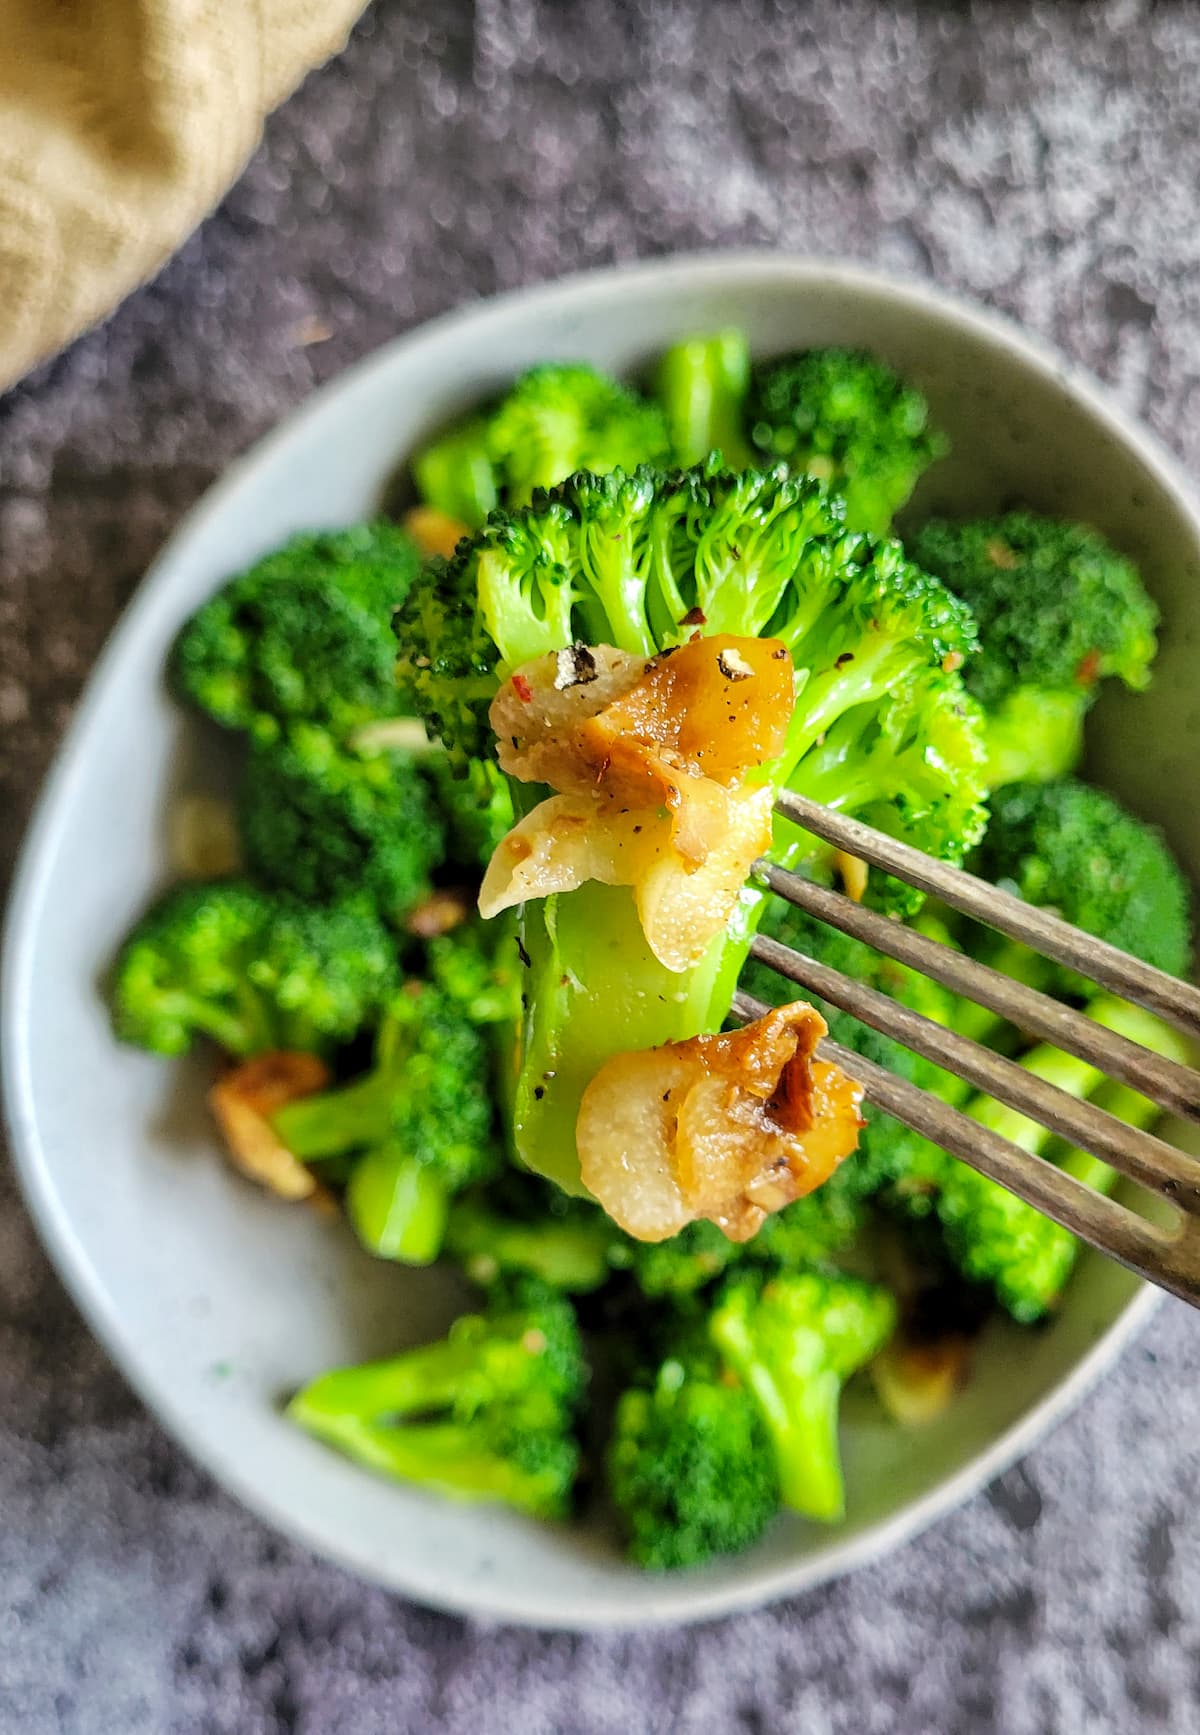 fork piercing pieces of crispy garlic and a broccoli floret over a bowl with the rest